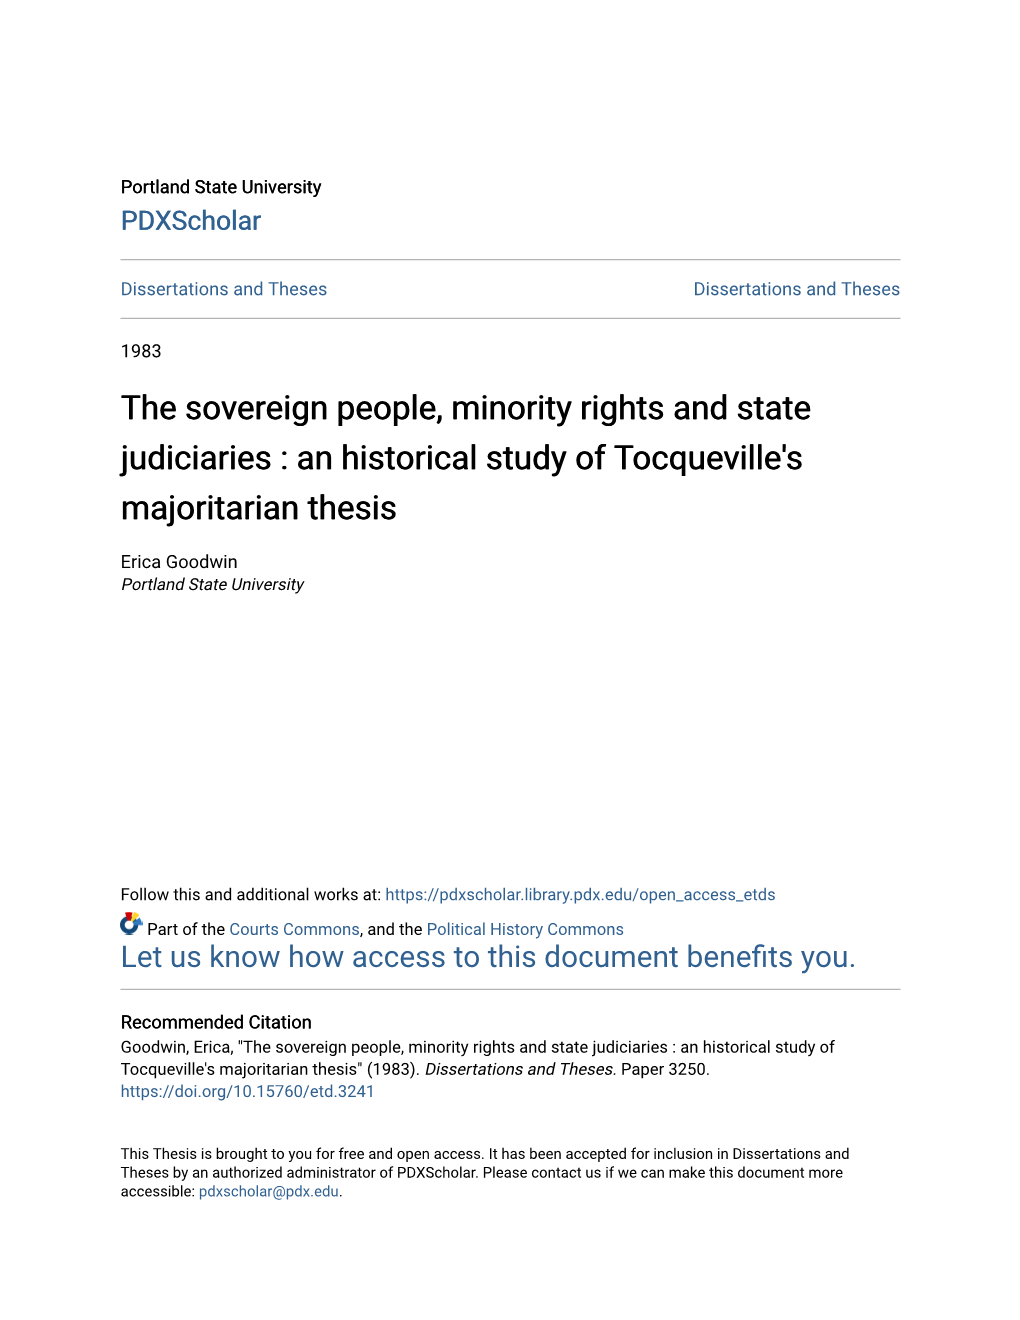 The Sovereign People, Minority Rights and State Judiciaries : an Historical Study of Tocqueville's Majoritarian Thesis